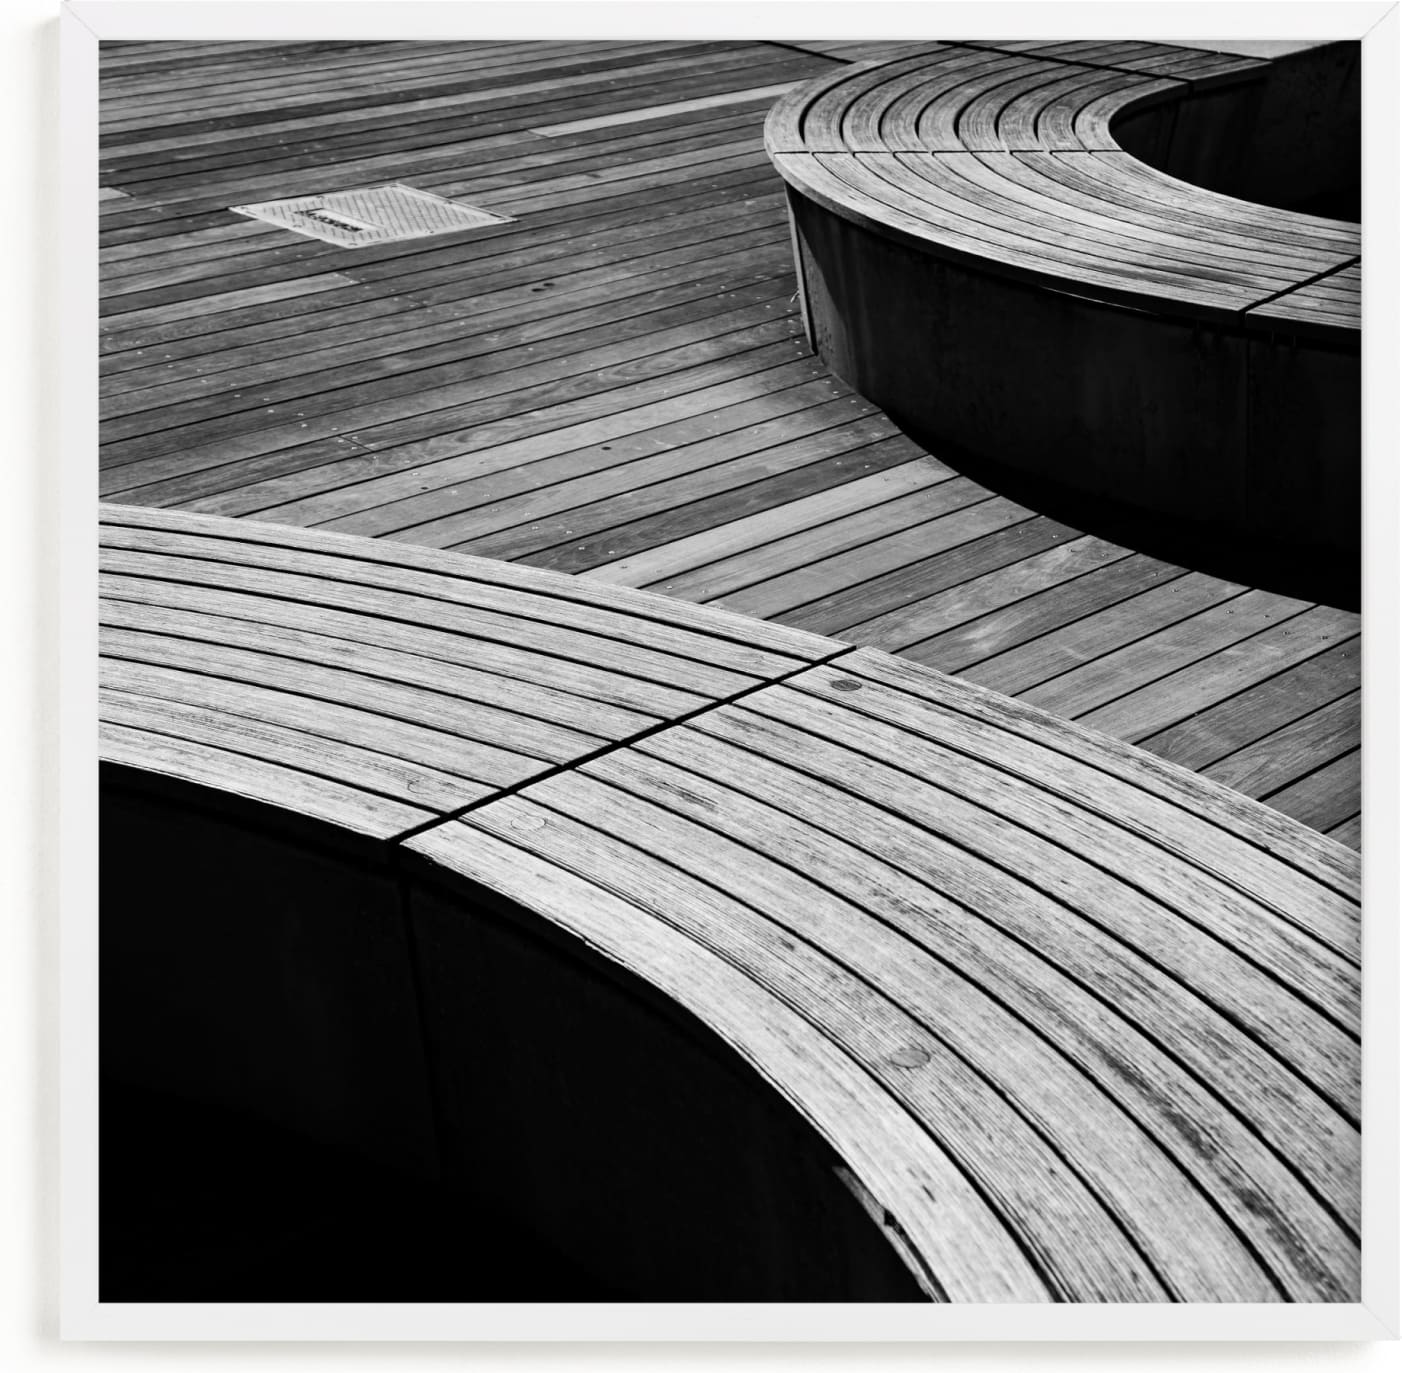 This is a black and white art by Van Tsao called Curve Bench Geometric II.